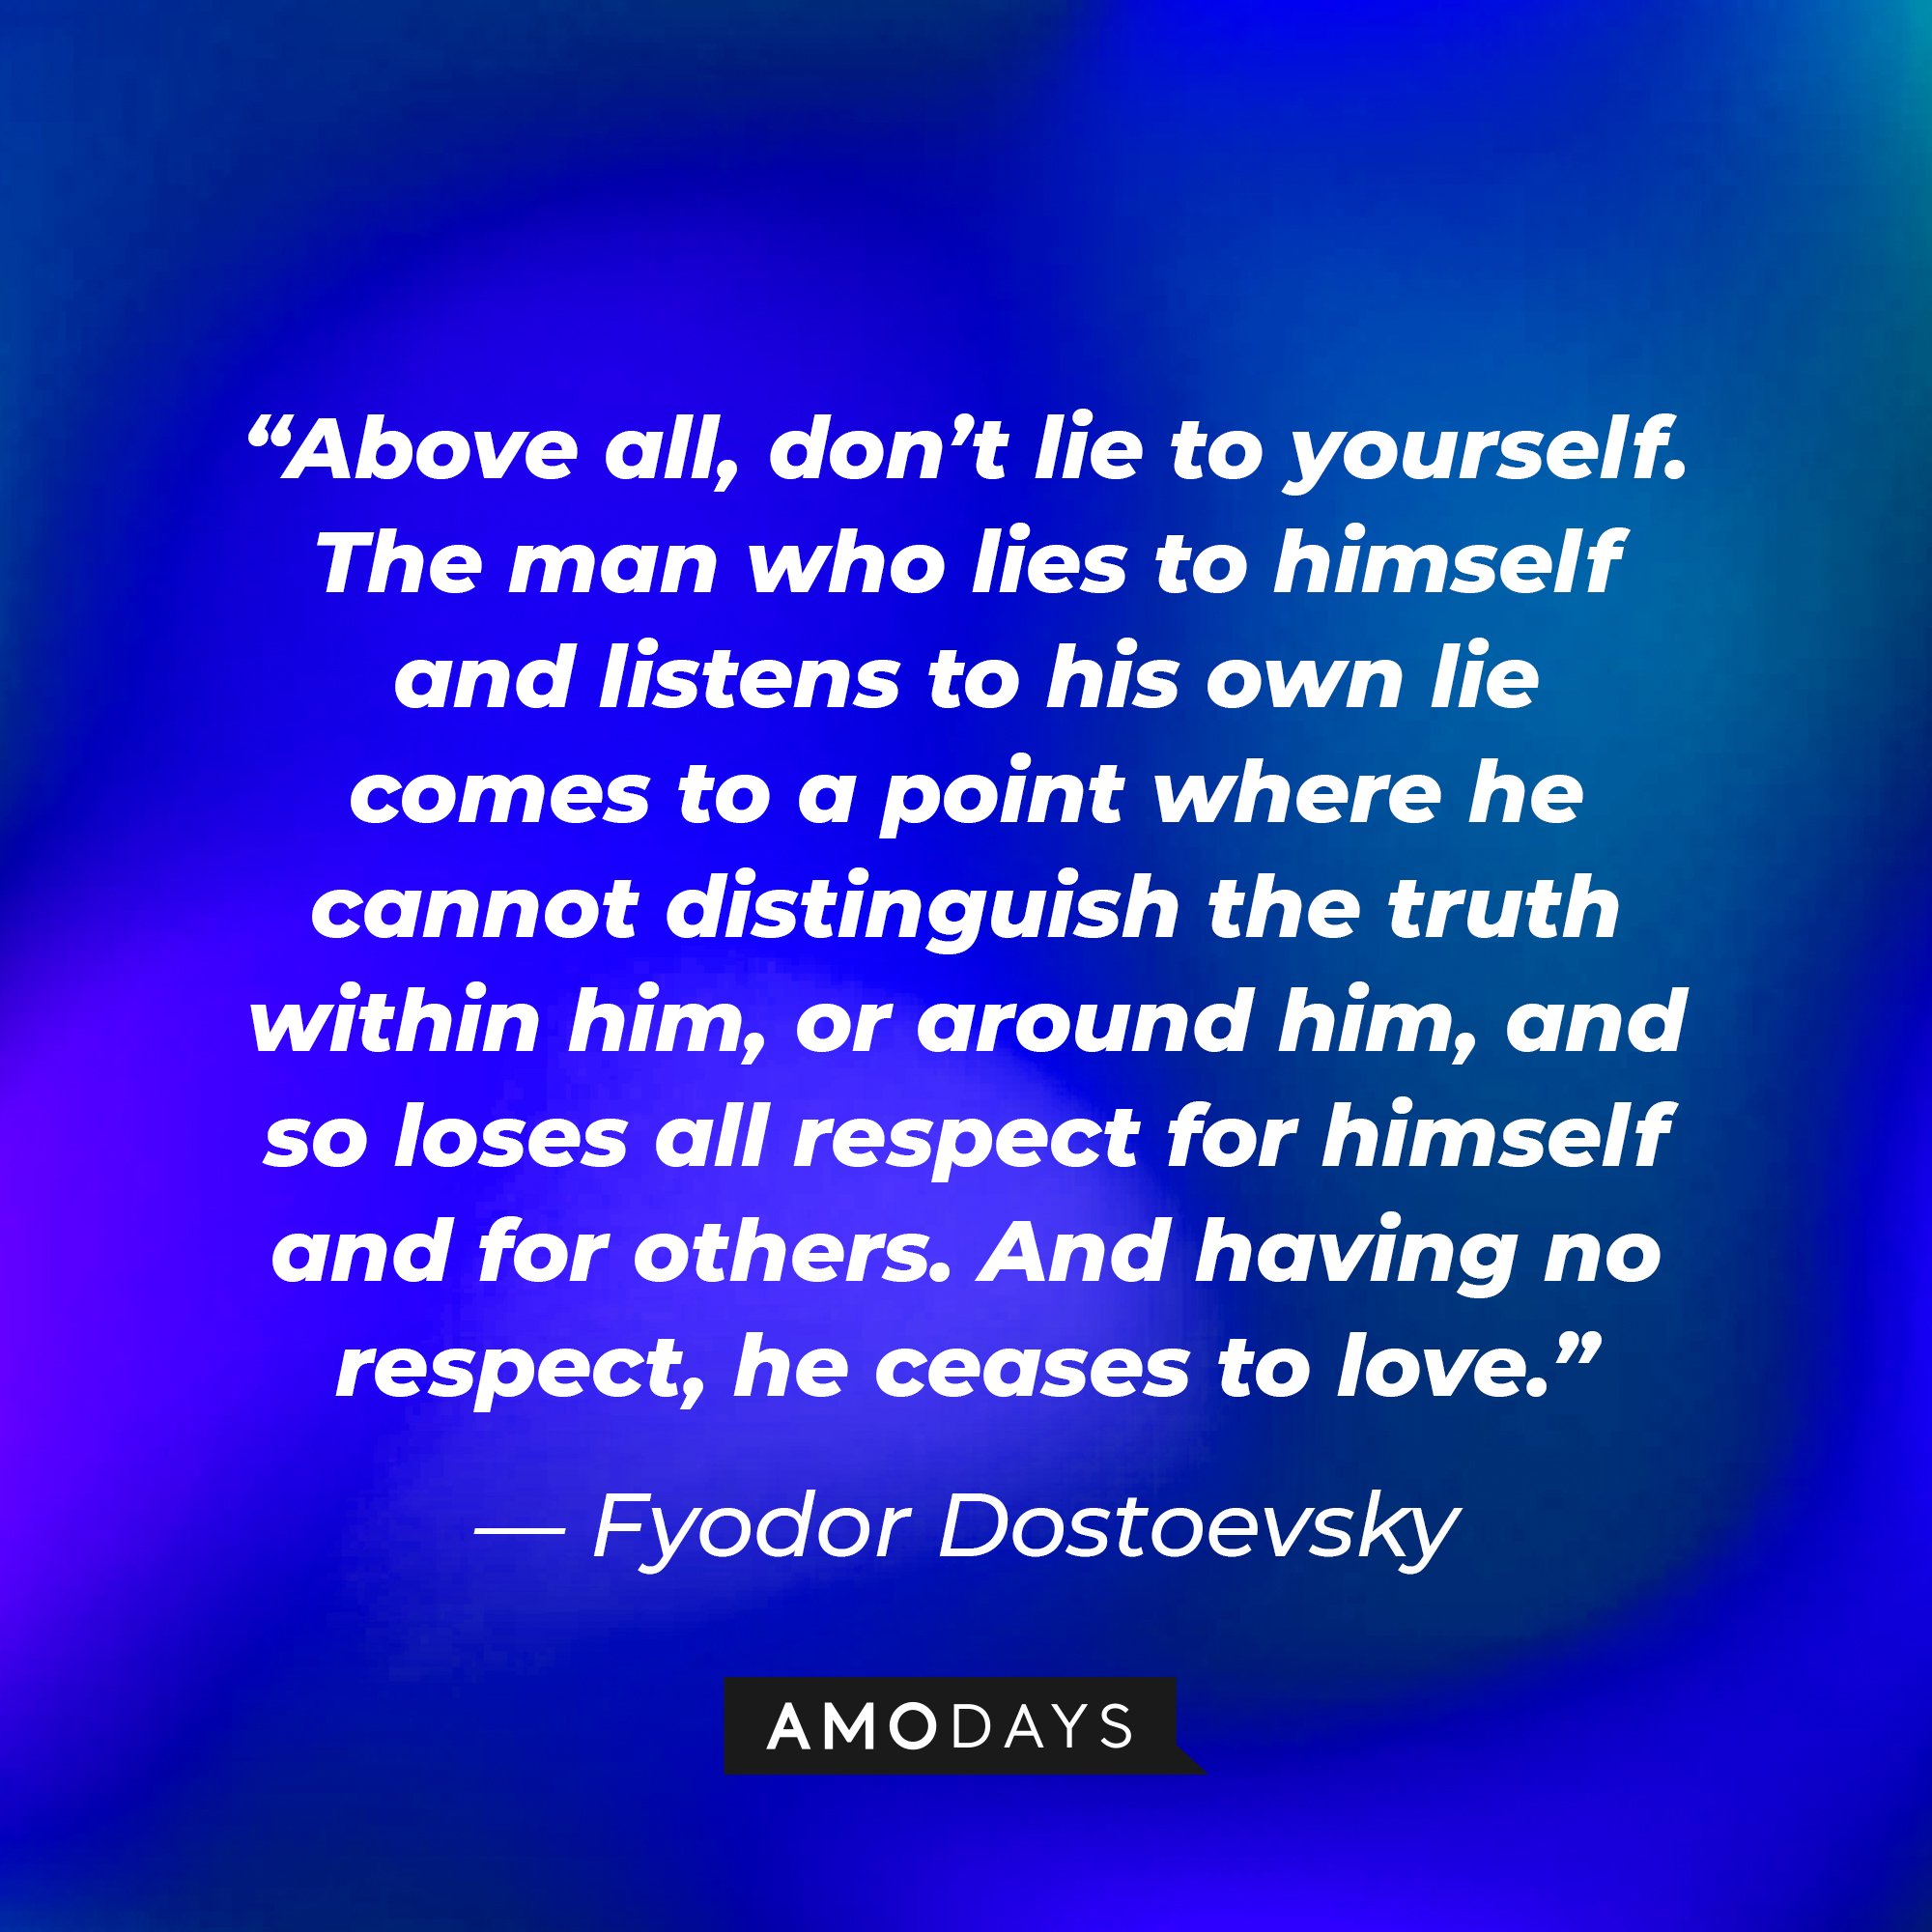 Fyodor Dostoevsky’s quote: “Above all, don’t lie to yourself. The man who lies to himself and listens to his own lie comes to a point where he cannot distinguish the truth within him, or around him, and so loses all respect for himself and for others. And having no respect, he ceases to love.” | Image: AmoDays